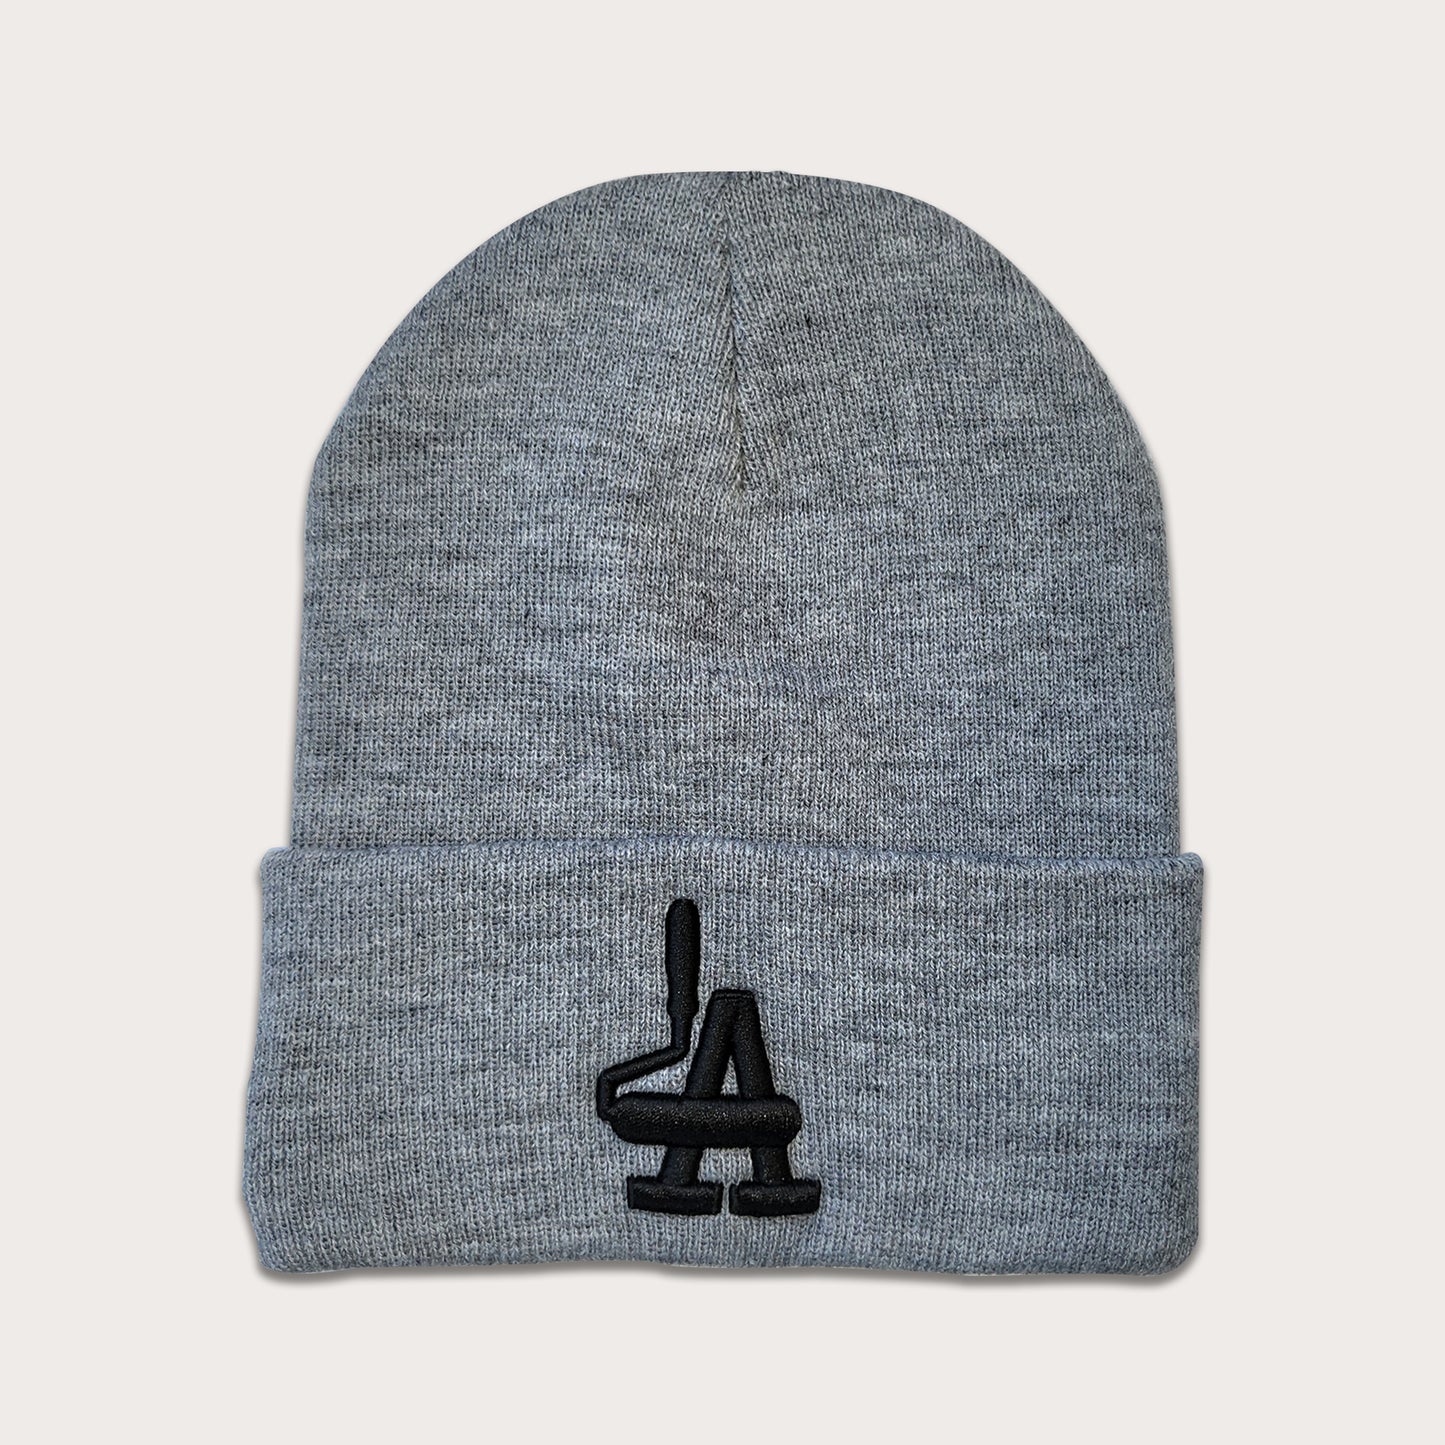 Locally owned graffiti brand Phatcaps, woven medium grey beanies with black puff embroidery.